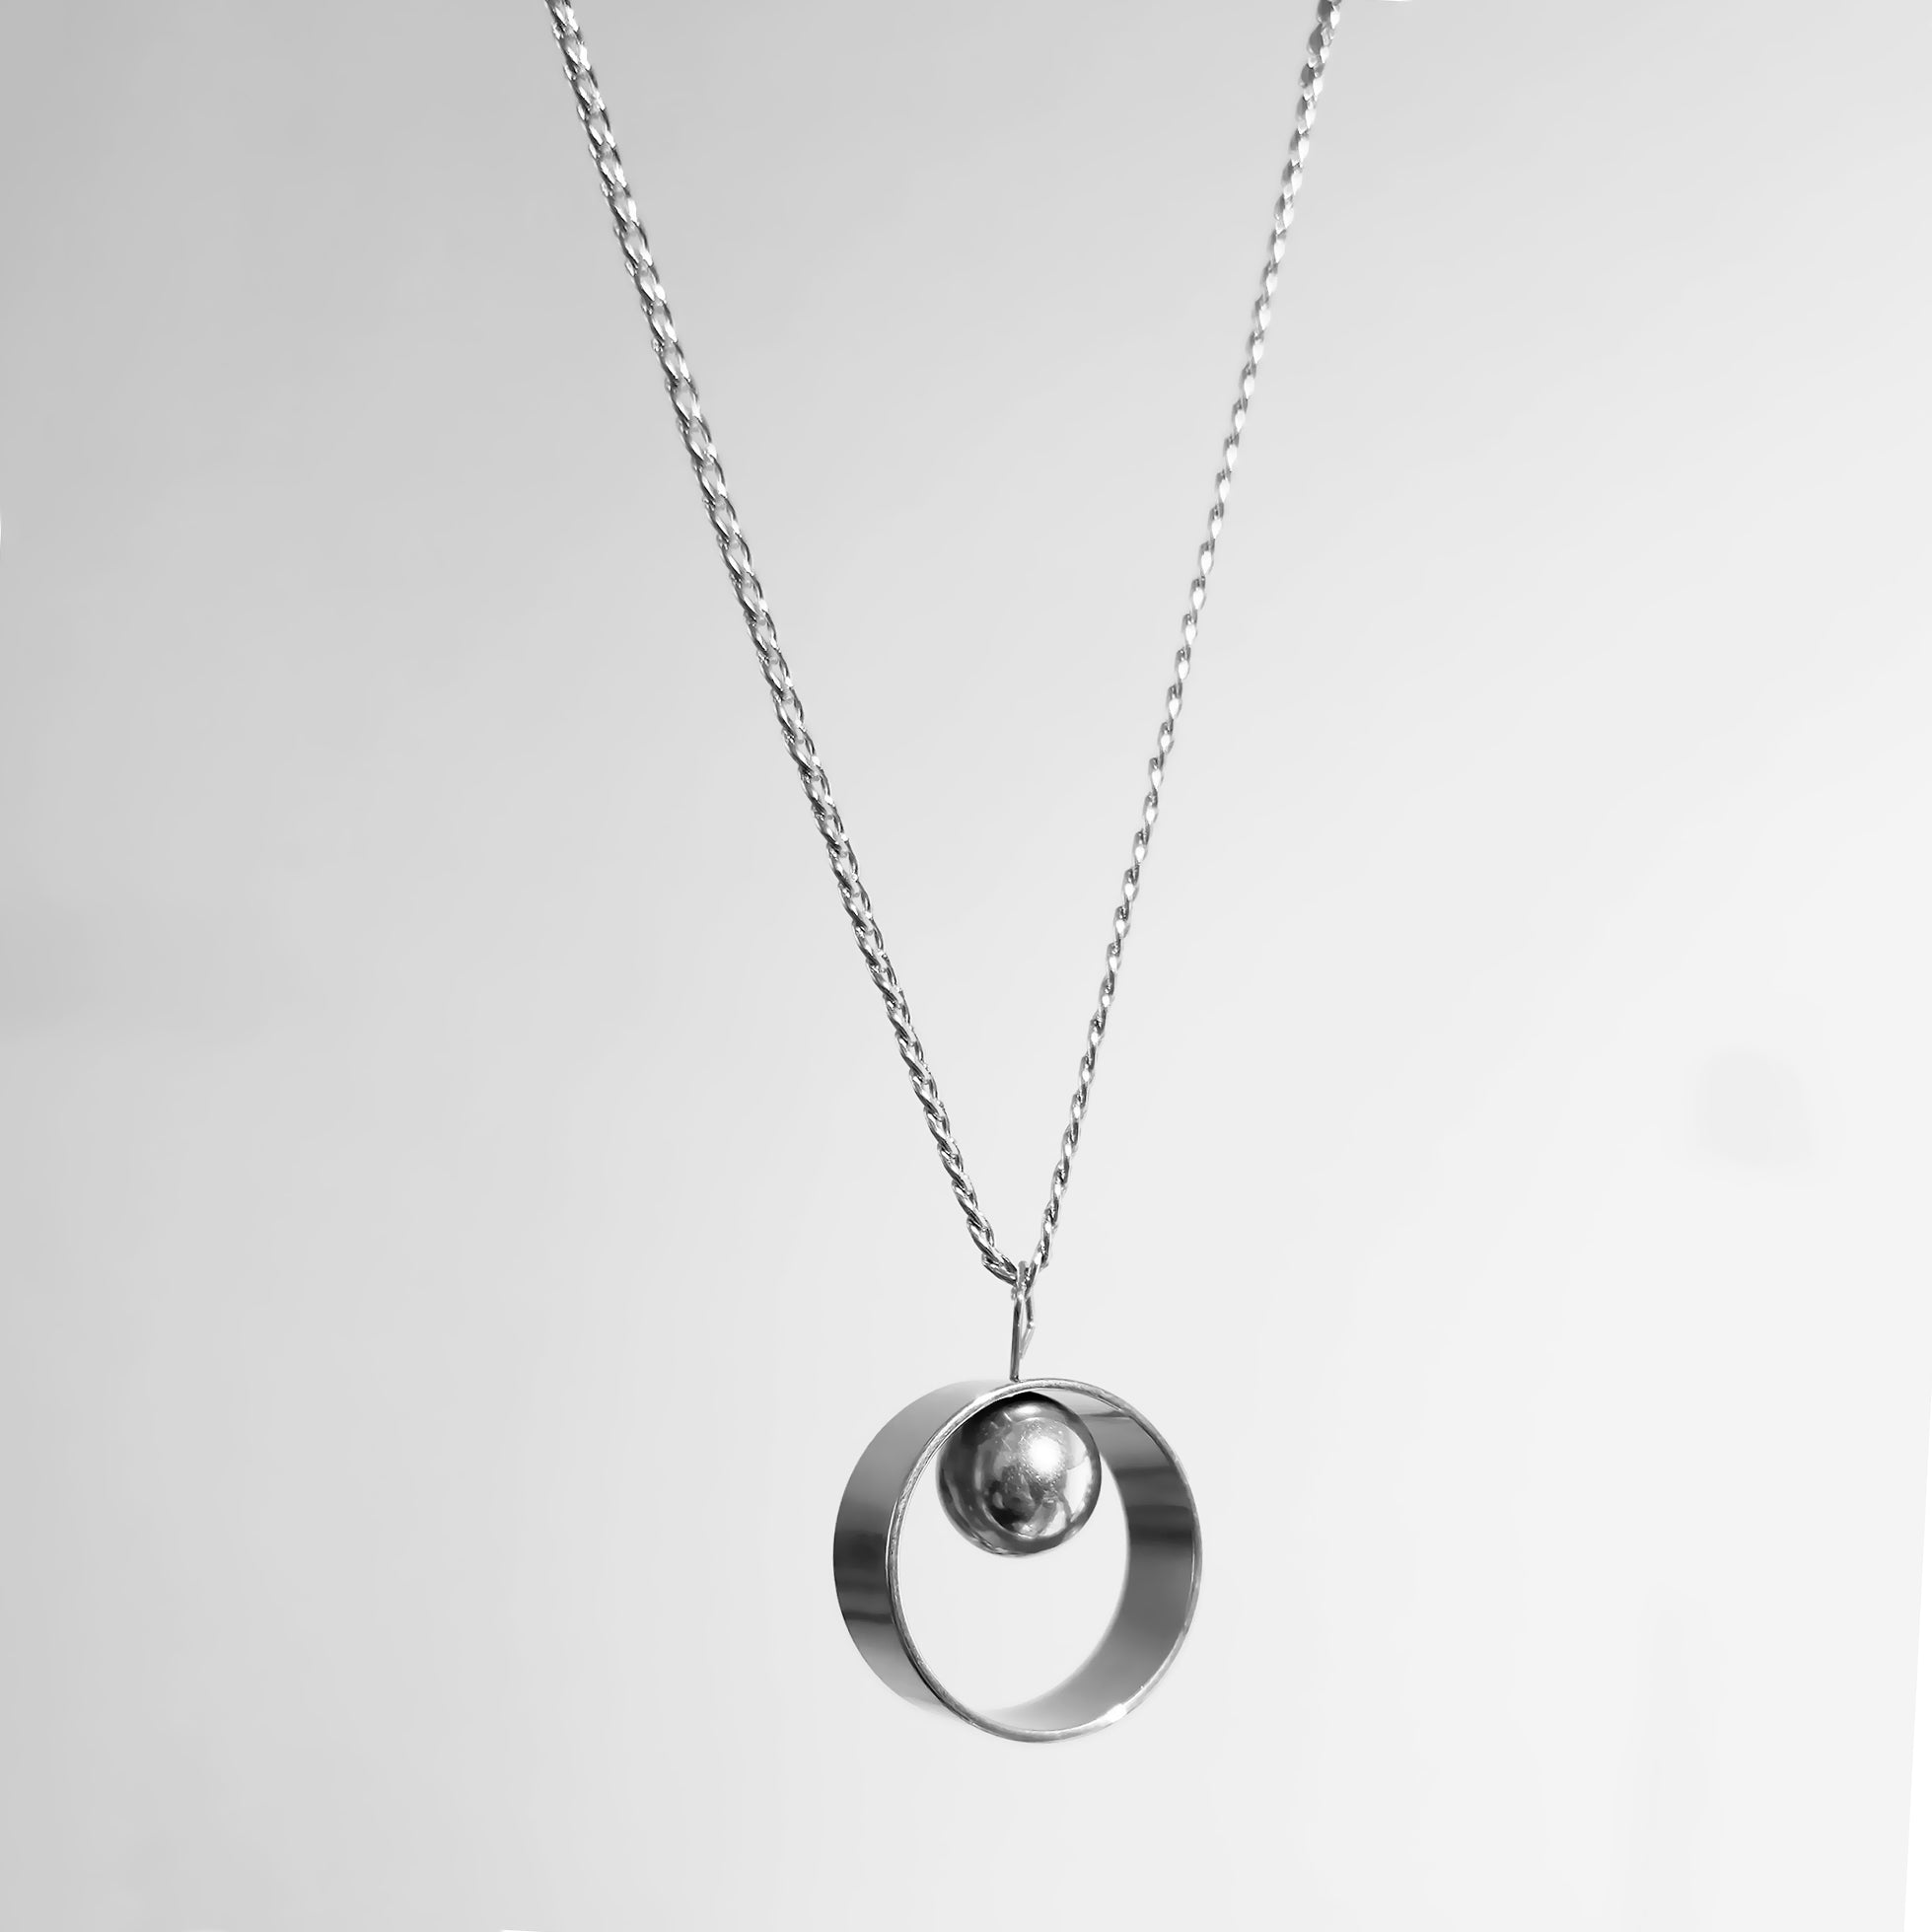 SPHERE RING STEEL NECKLACE